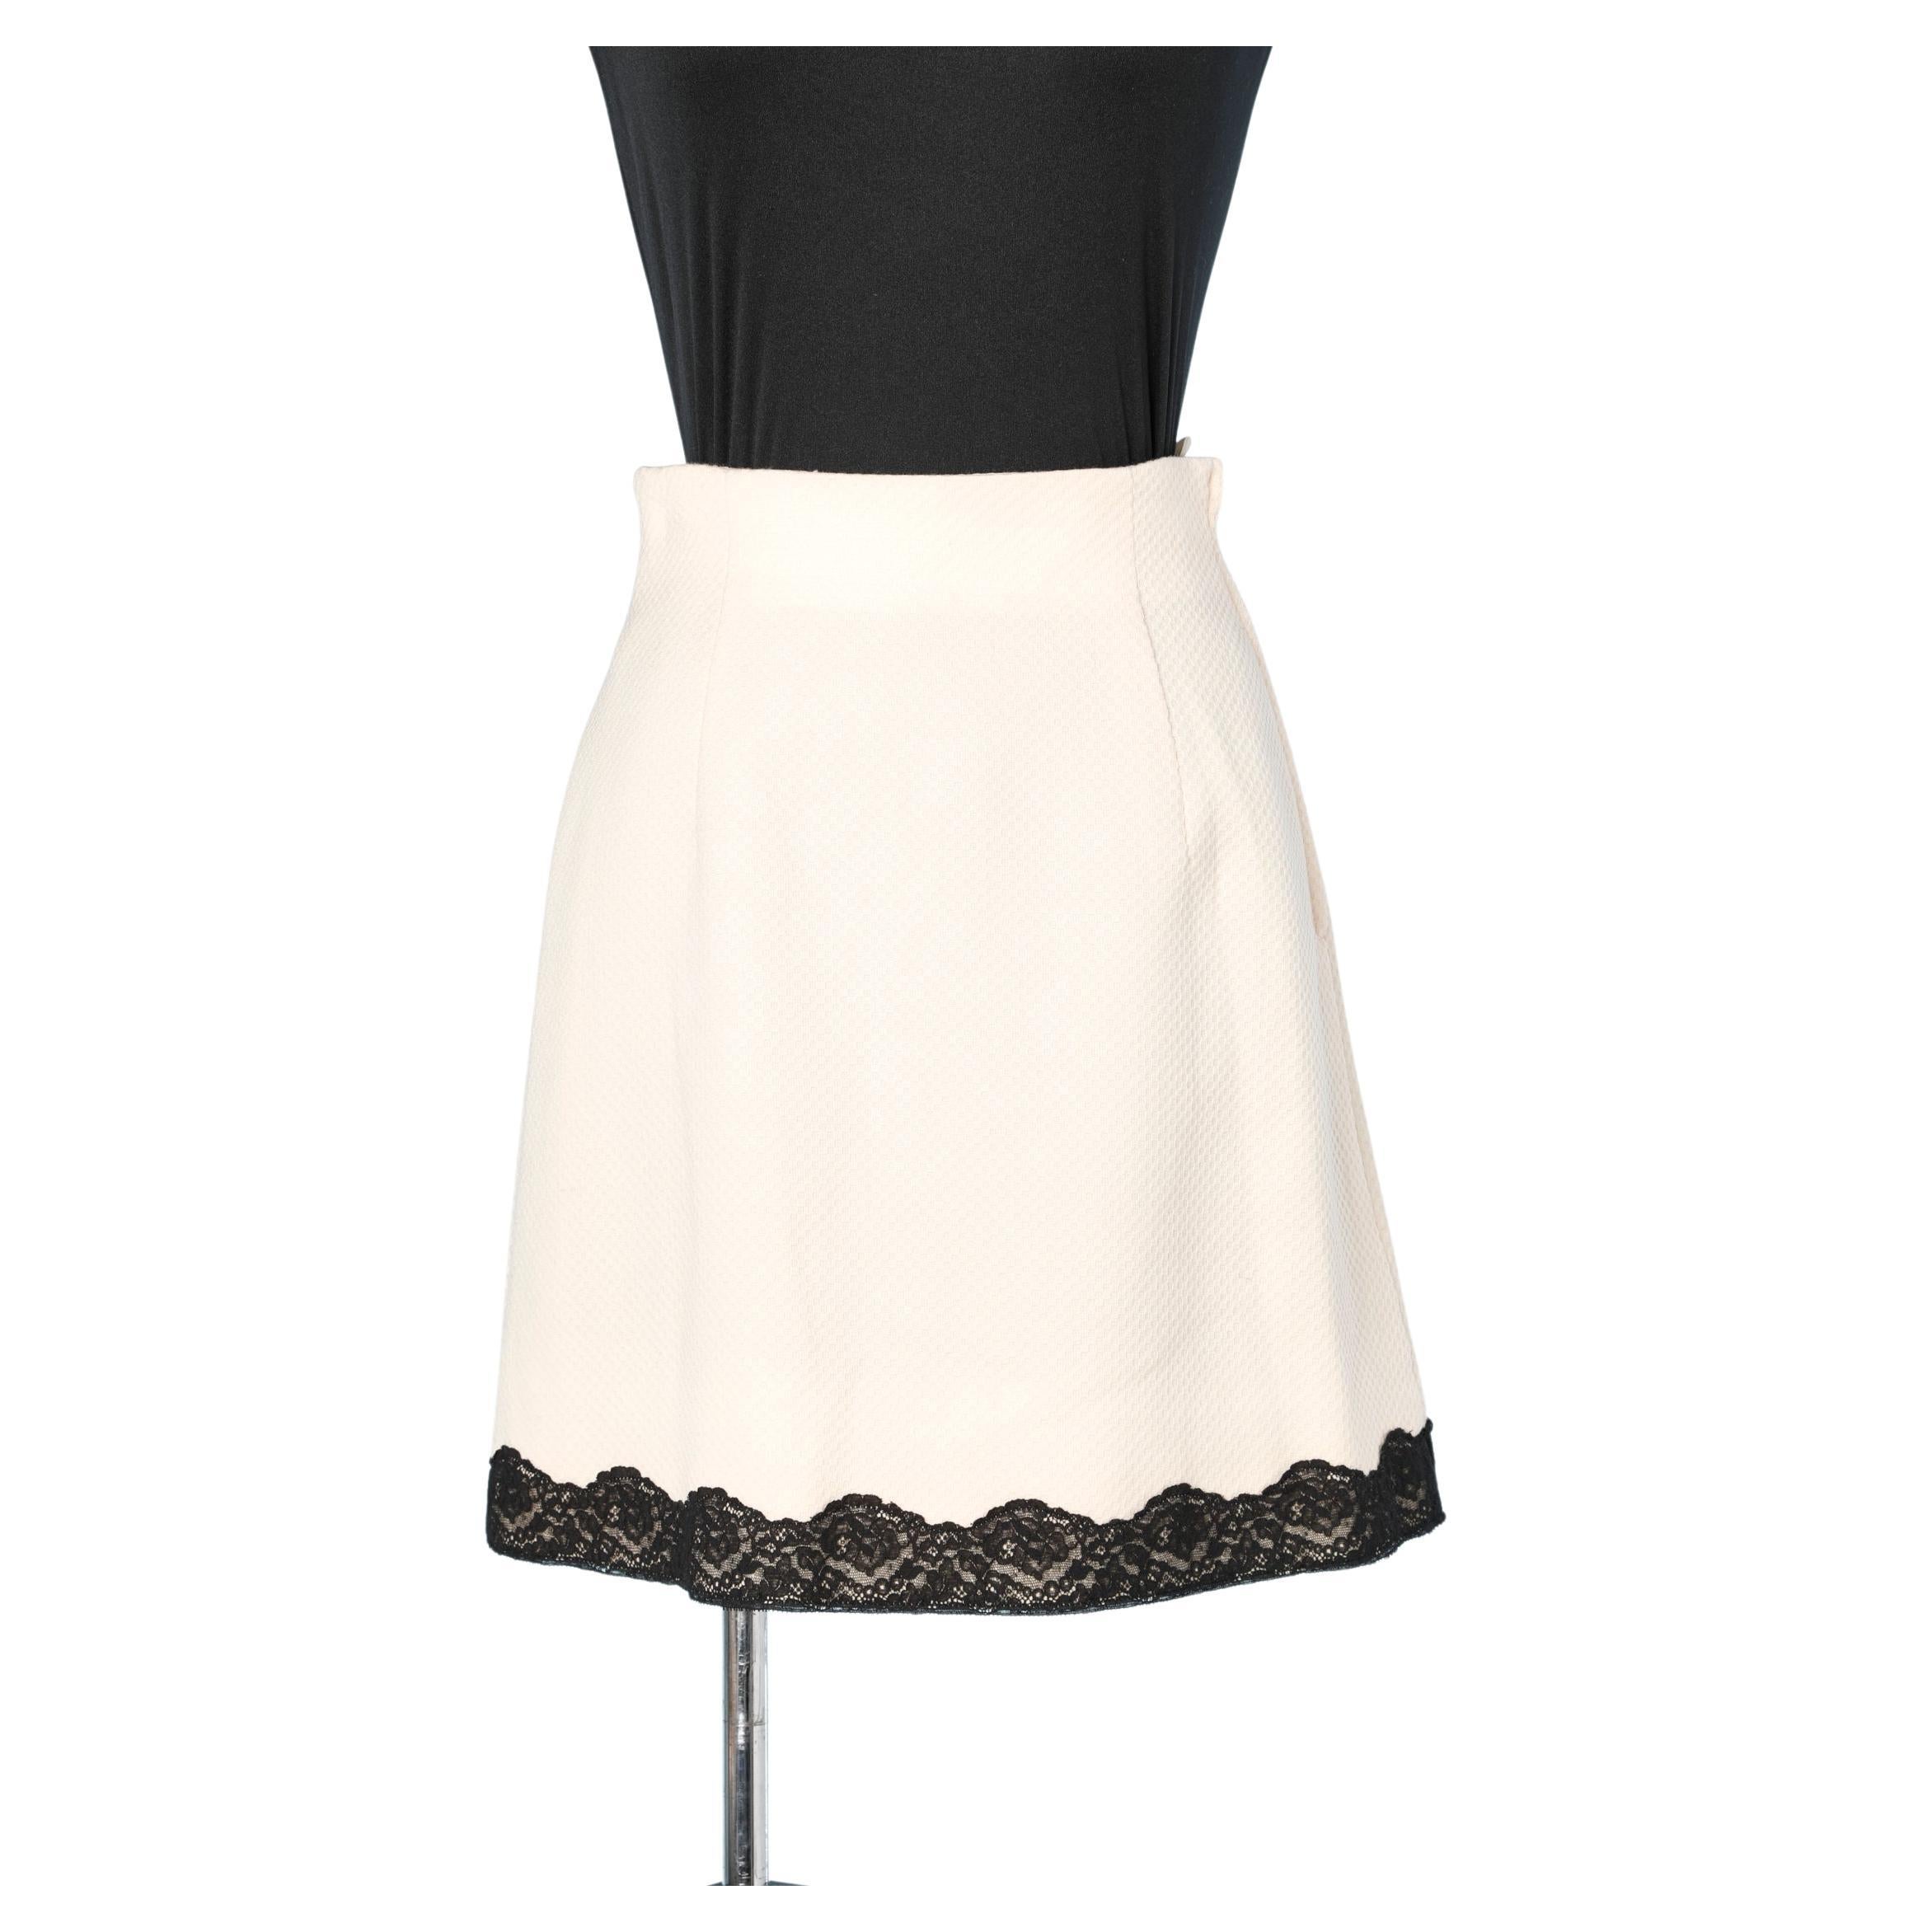 Off-white wool skirt with black lace edge Chantal Thomass 